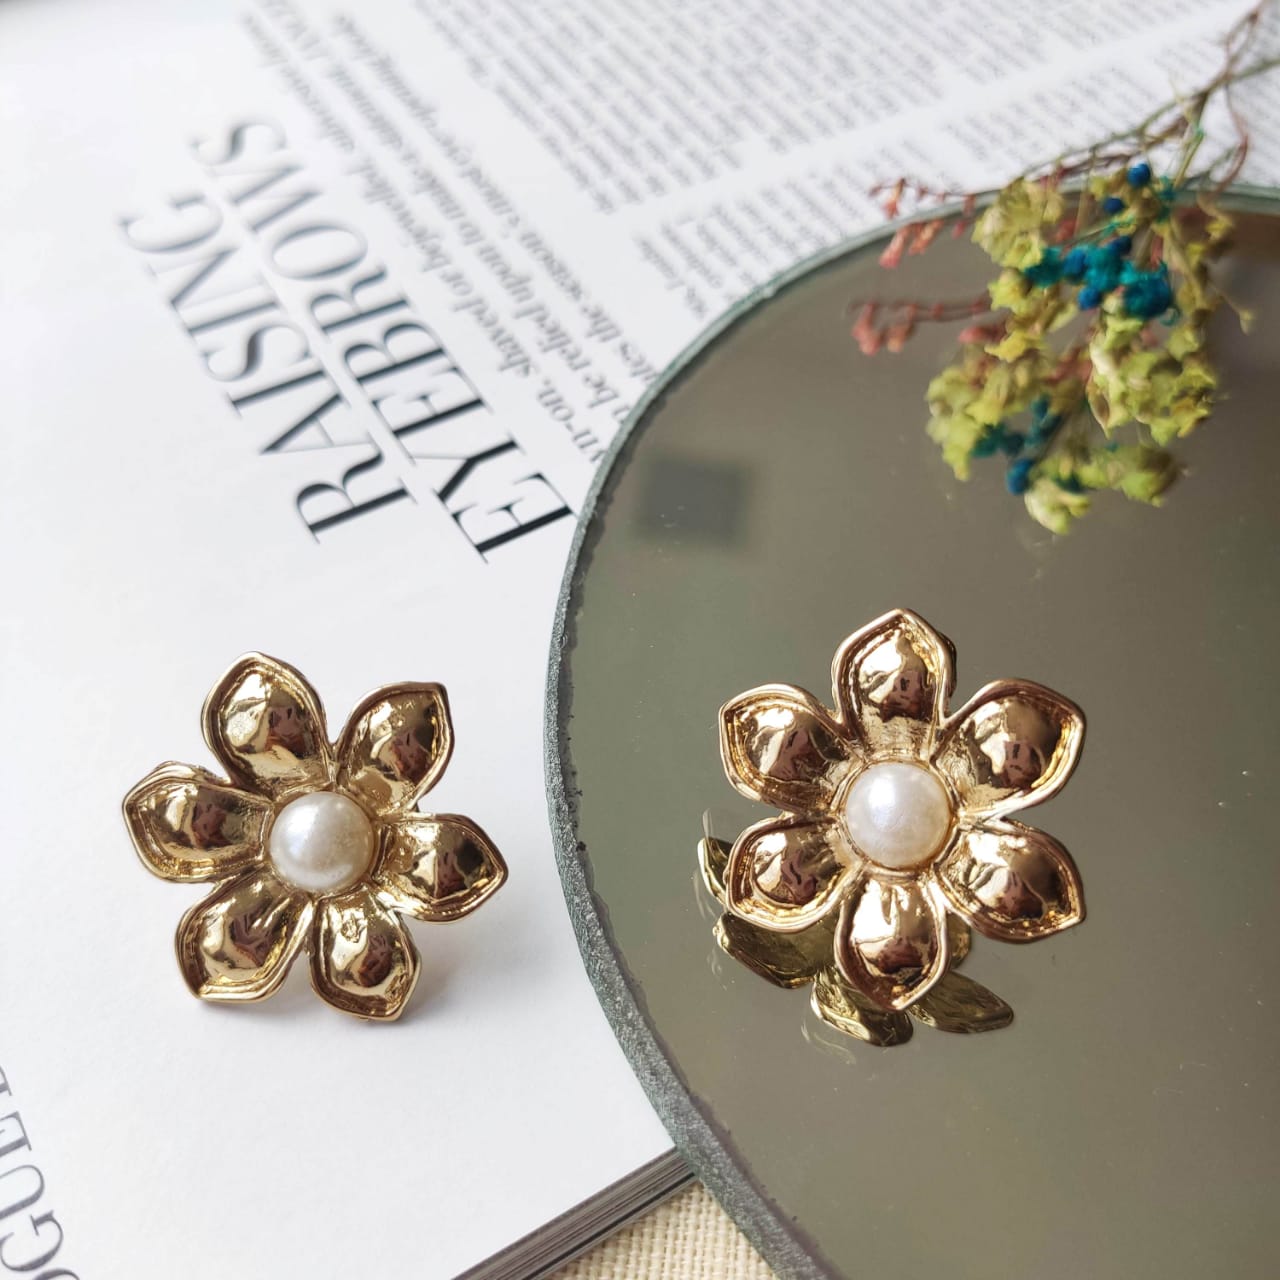 Discover more than 126 vintage gold and pearl earrings latest